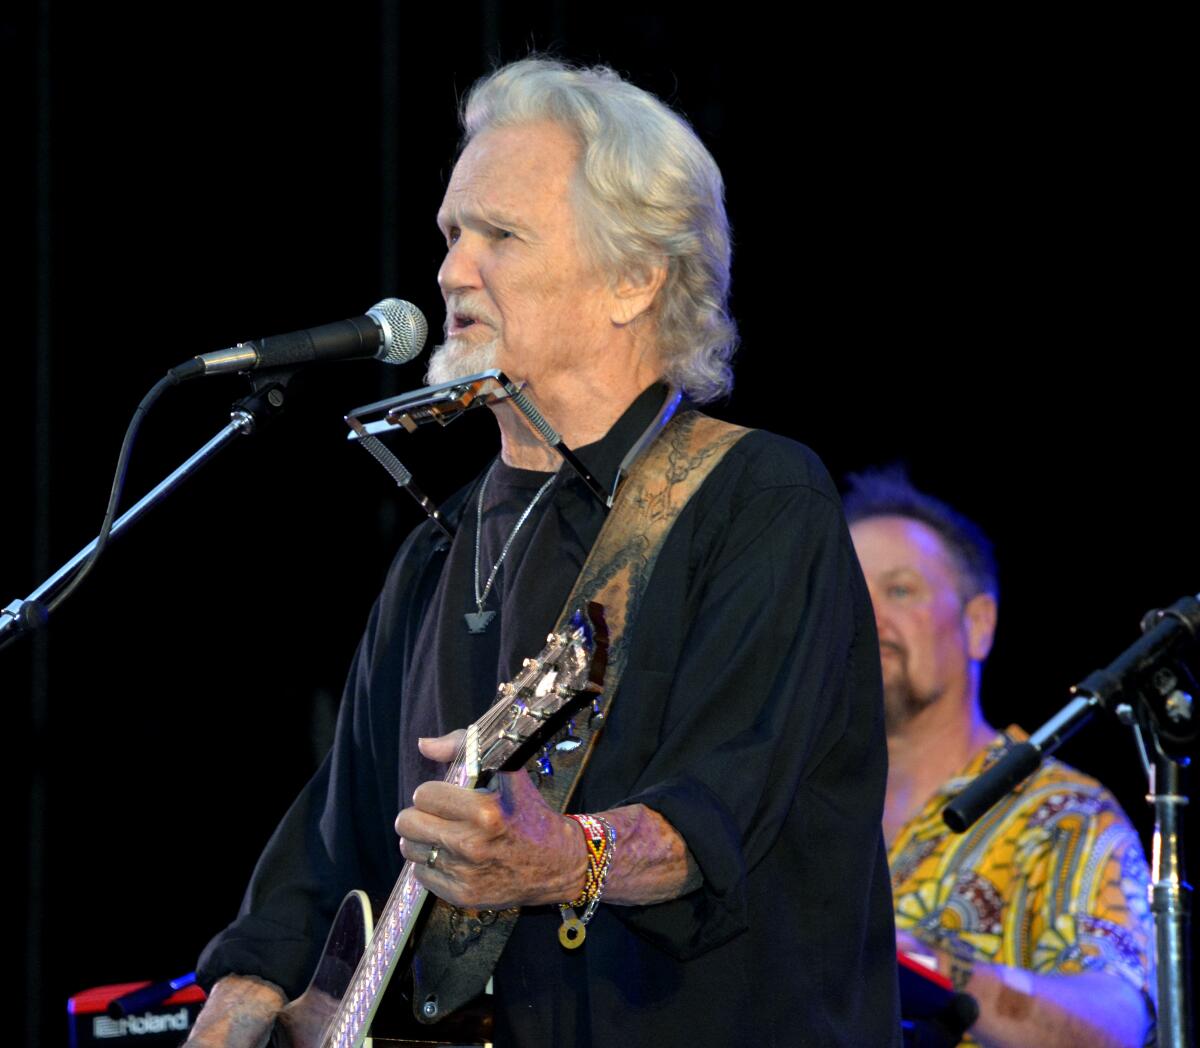 Among the highlights of Kris Kristofferson’s performance at the Starlight Bowl on Saturday was his song “Me and Bobby McGee.”